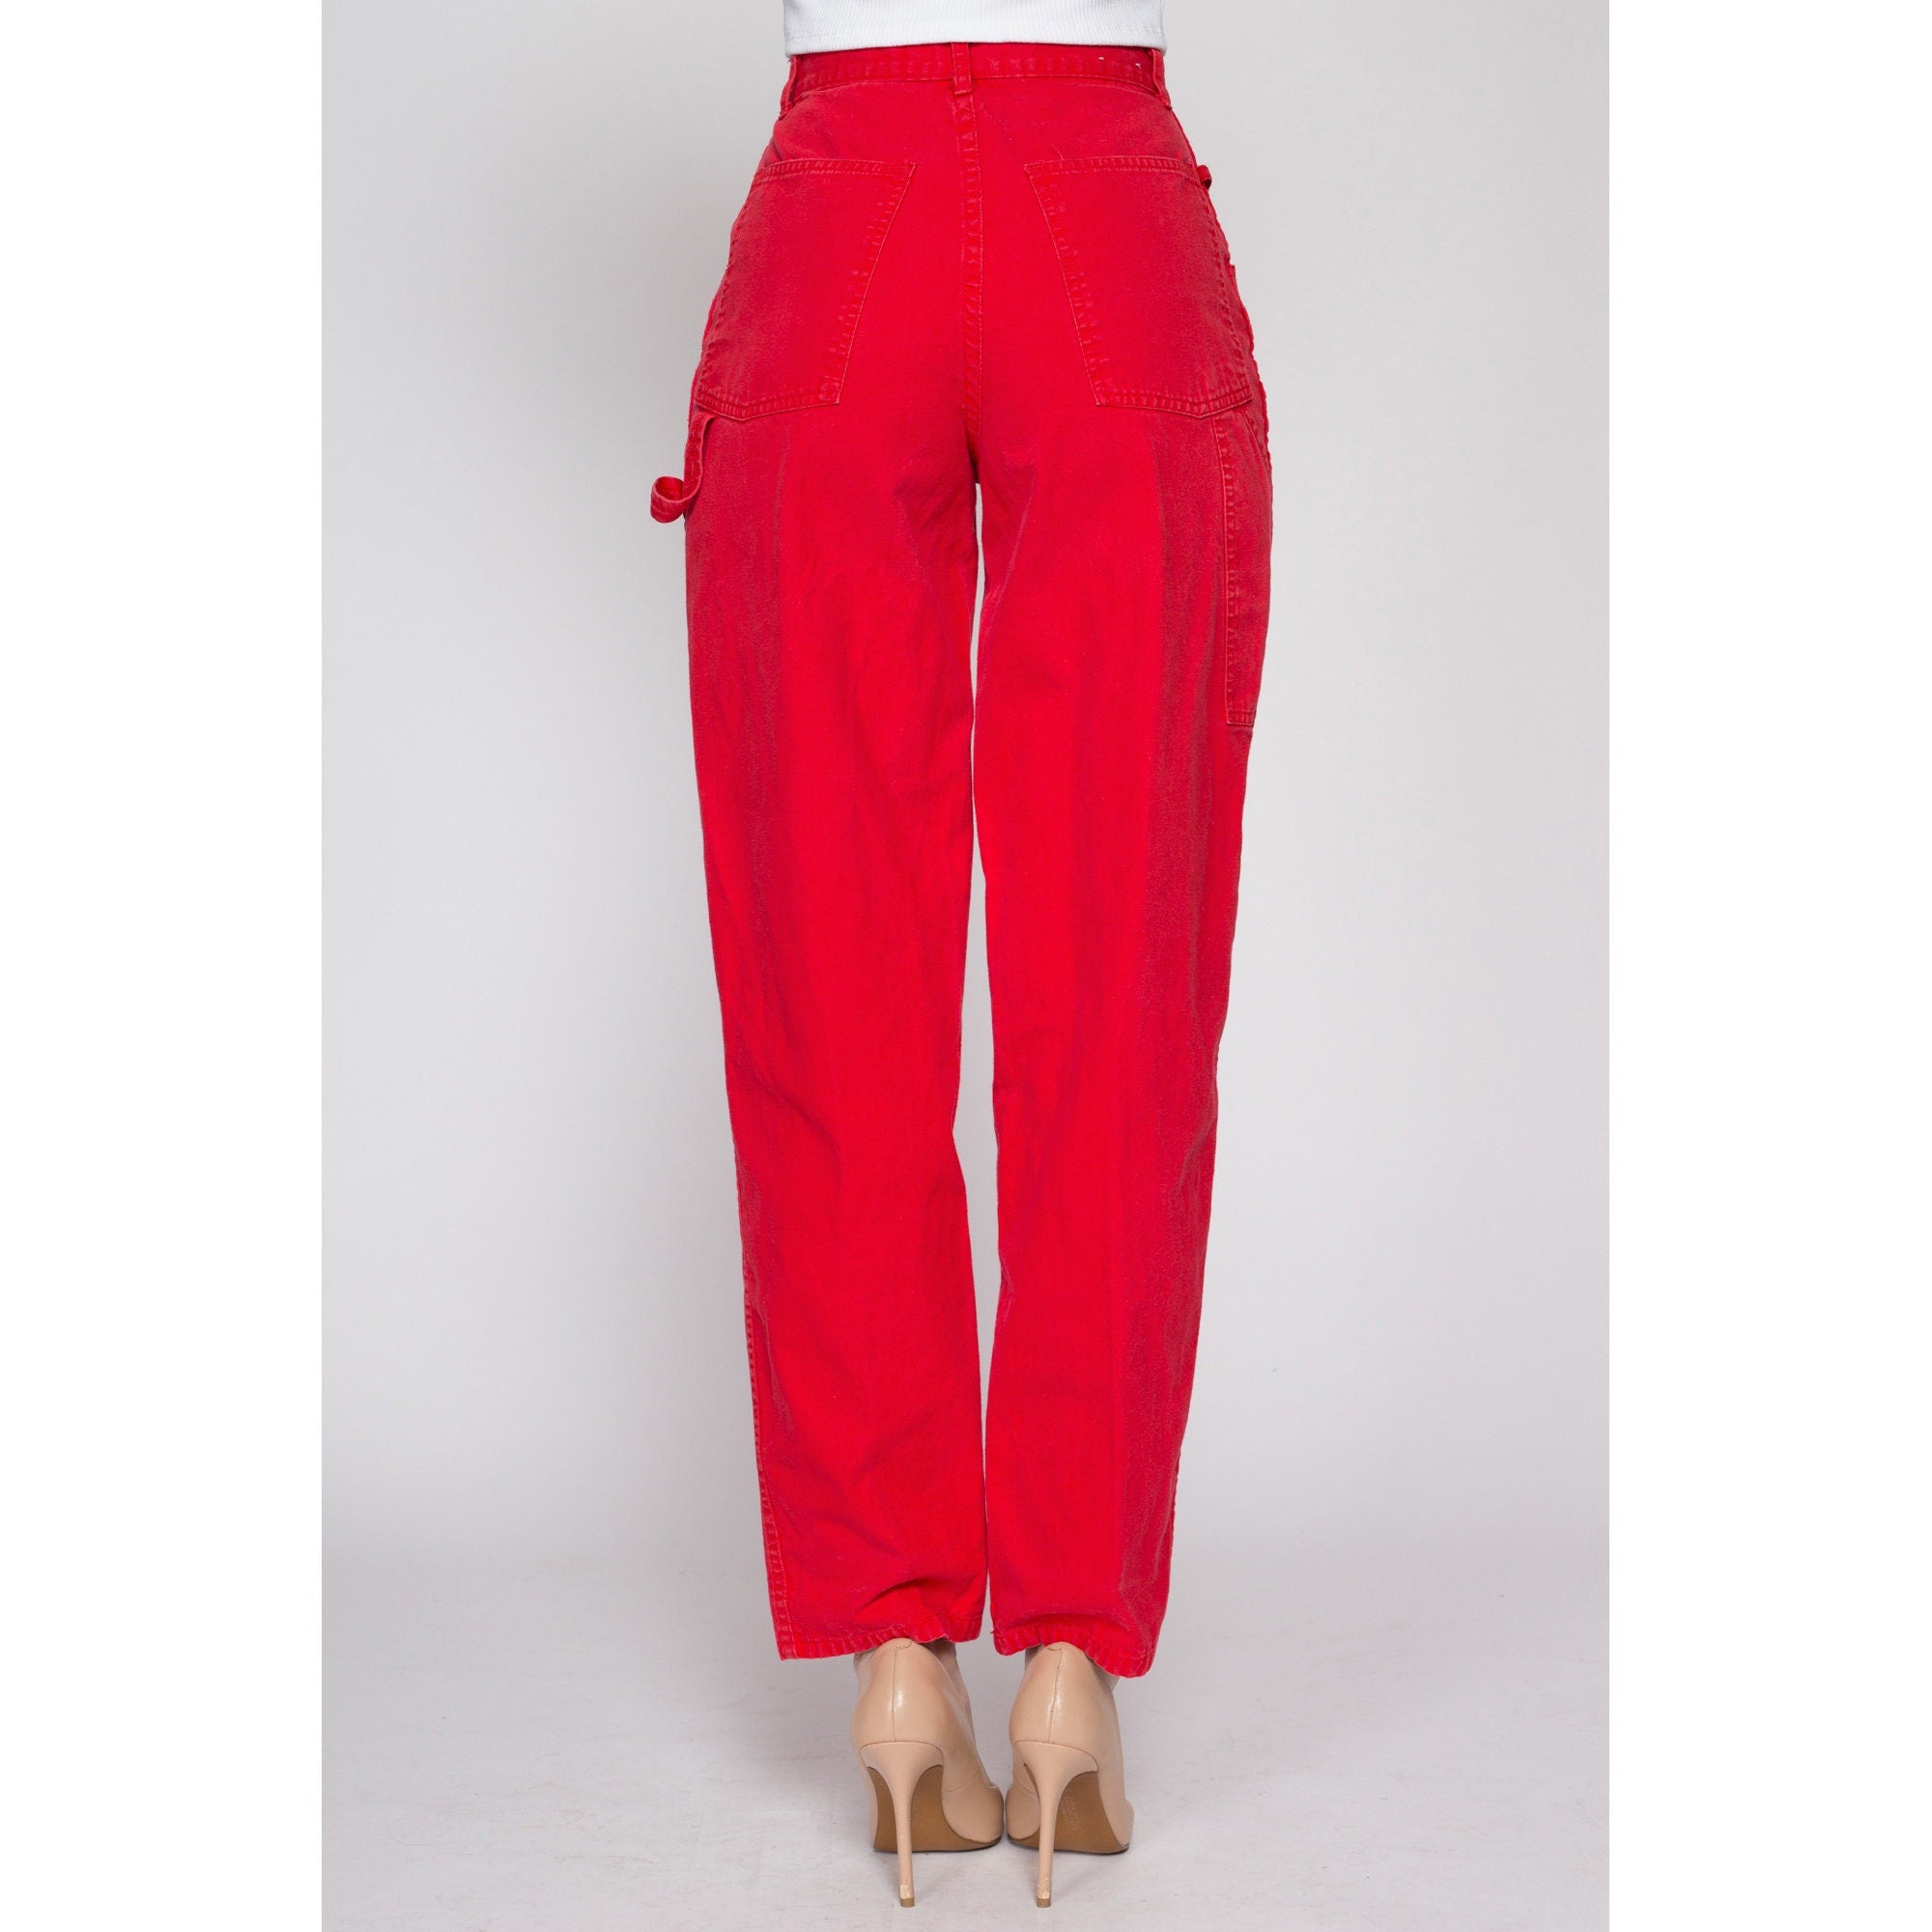 Buy Red Cotton Solid Pant (Pants) for INR449.50 | Biba India